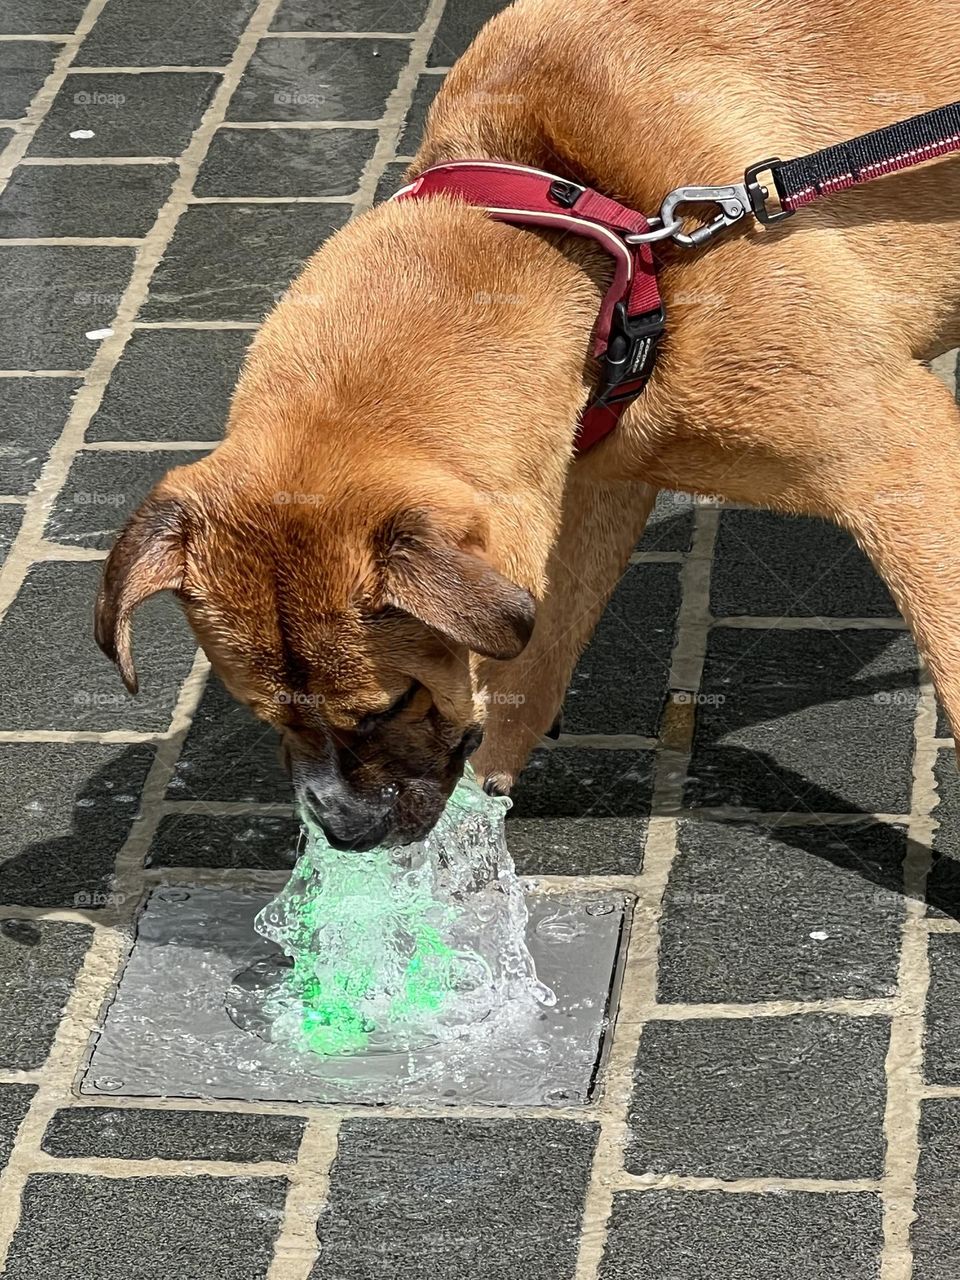 Dog drink water 